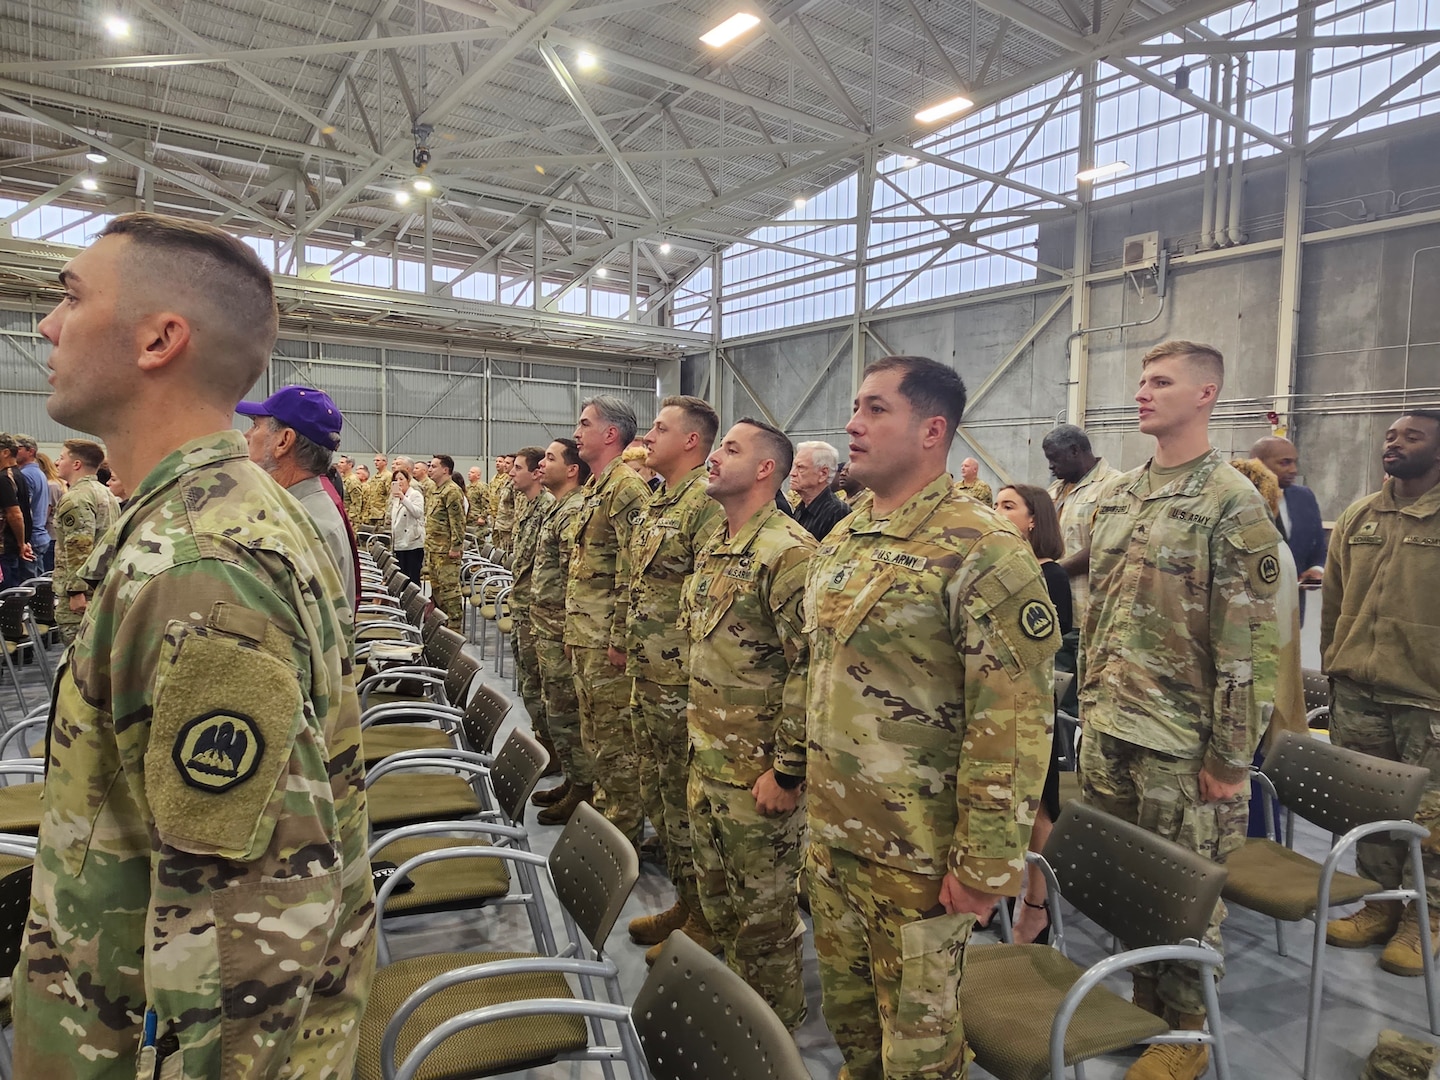 Soldiers of the 1-244th Assault Helicopter Battalion sing the Army Song during a deployment ceremony at the Army Aviation Support Facility #1 in Hammond, Louisiana, Dec. 2, 2023. Over 70 Soldiers will deploy to Kosovo to support a NATO-led peacekeeping mission.